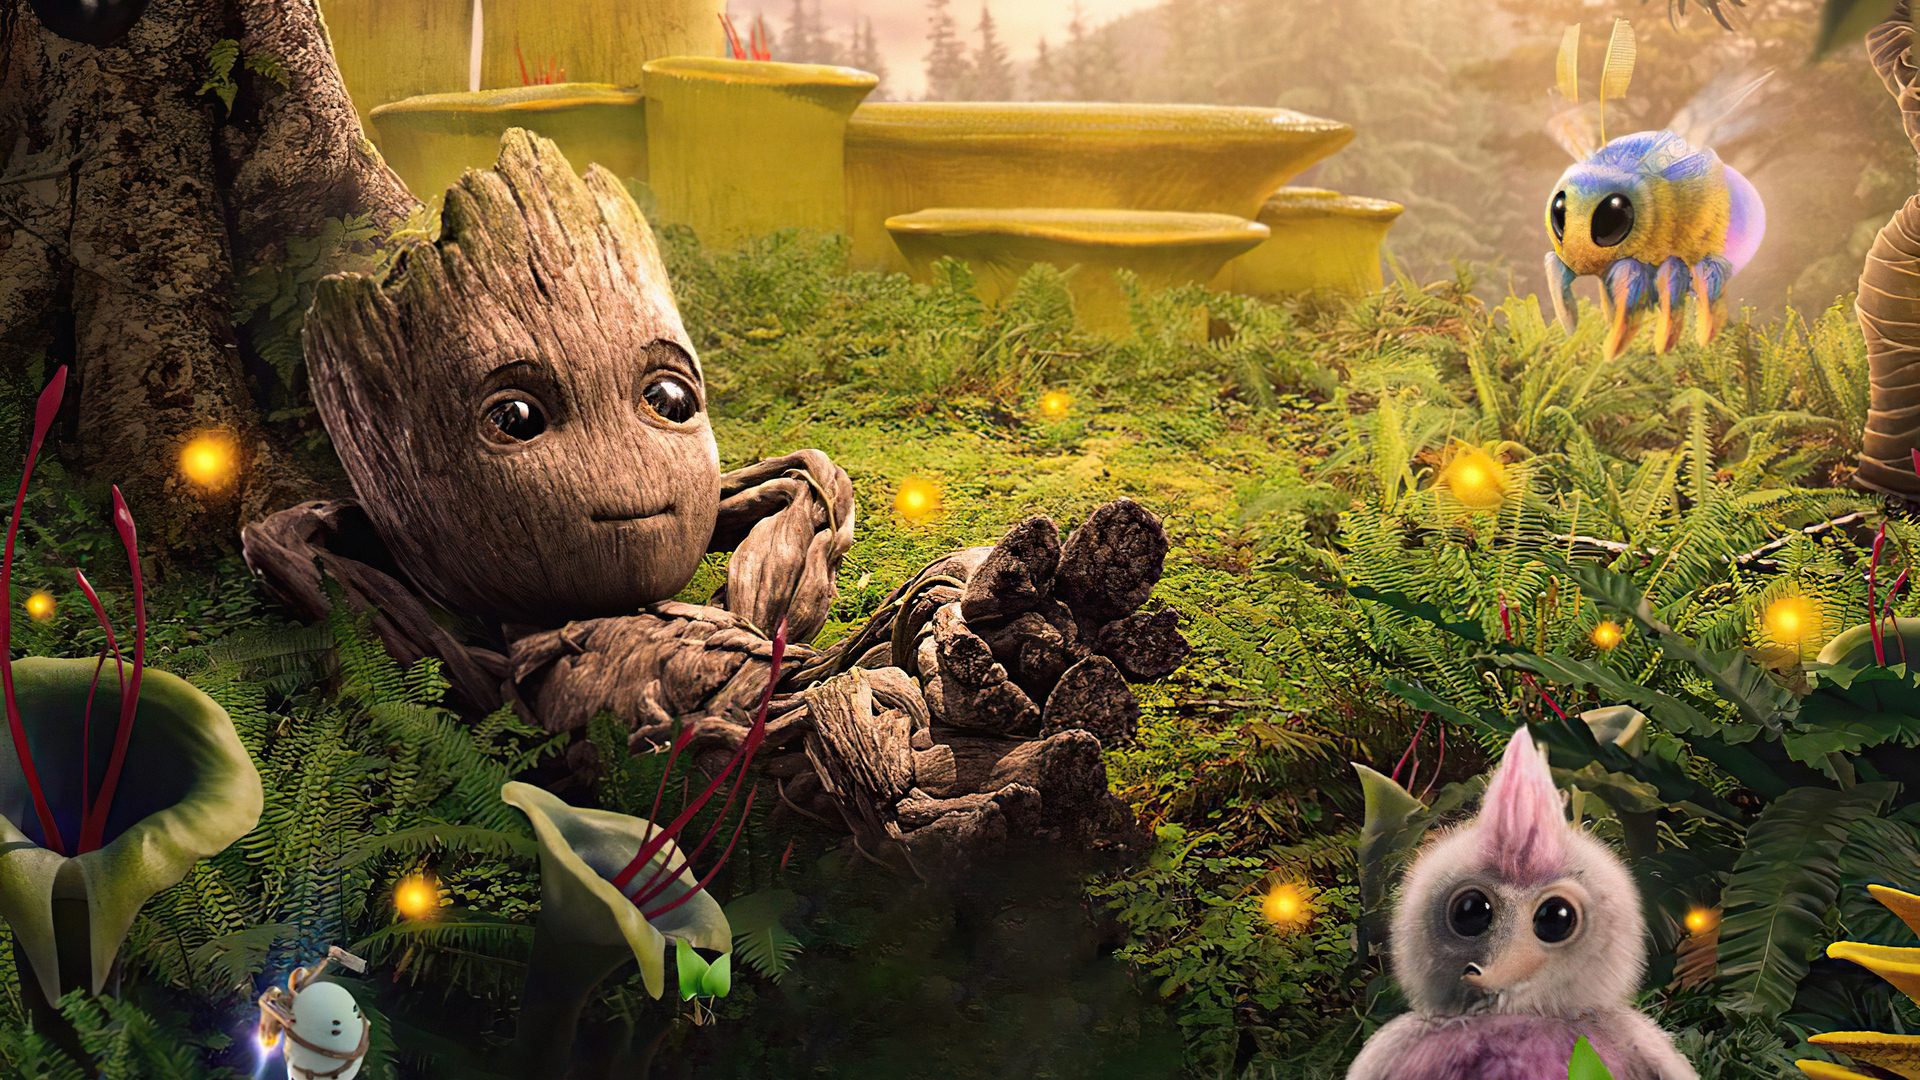 I Am Groot HD Aesthetic Wallpaper, HD TV Series 4K Wallpaper, Image, Photo and Background